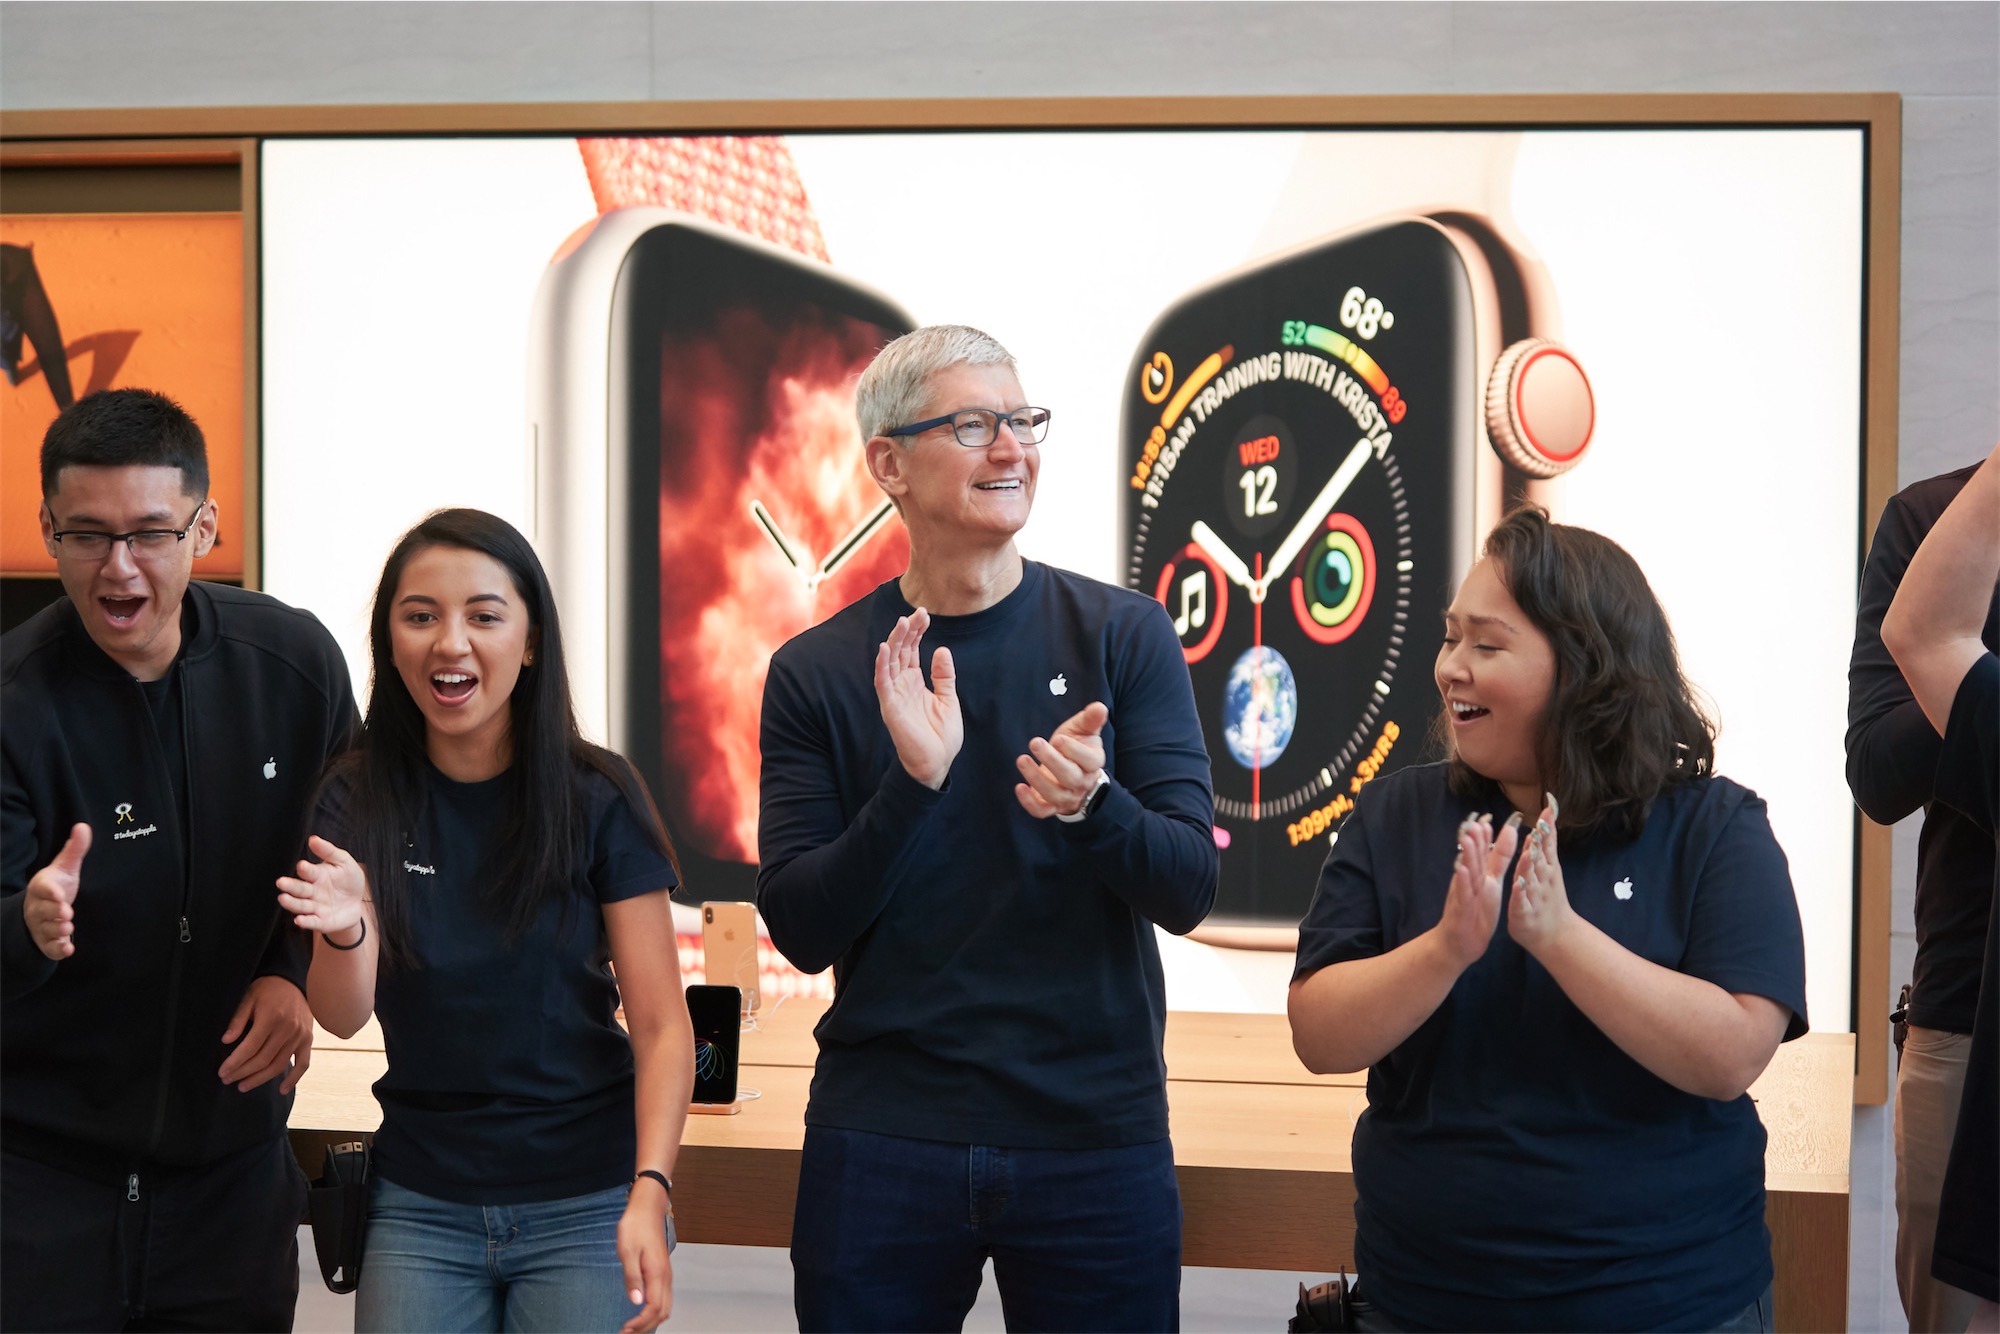 Tim Cook on launch of new iPhones and Apple Watch at Apple stores